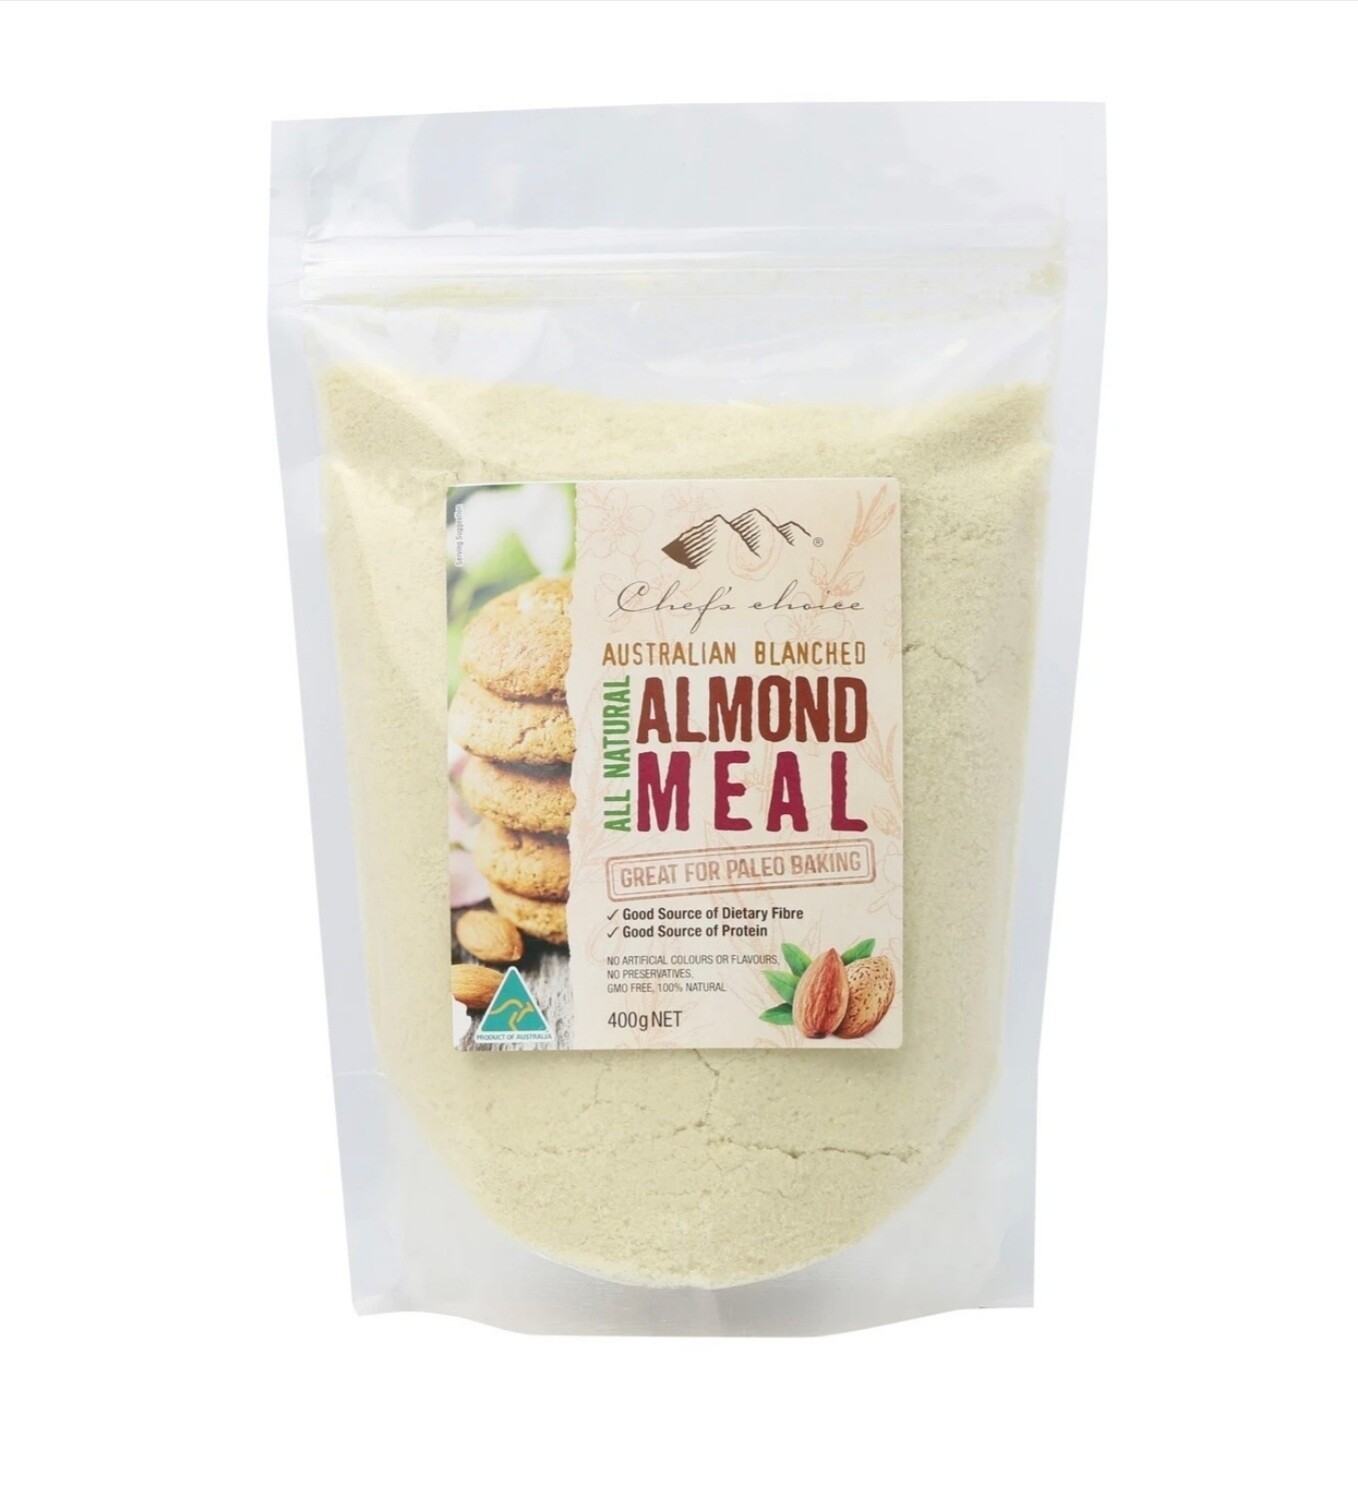 Chef's Choice Australian Blanched Almond Meal 400g